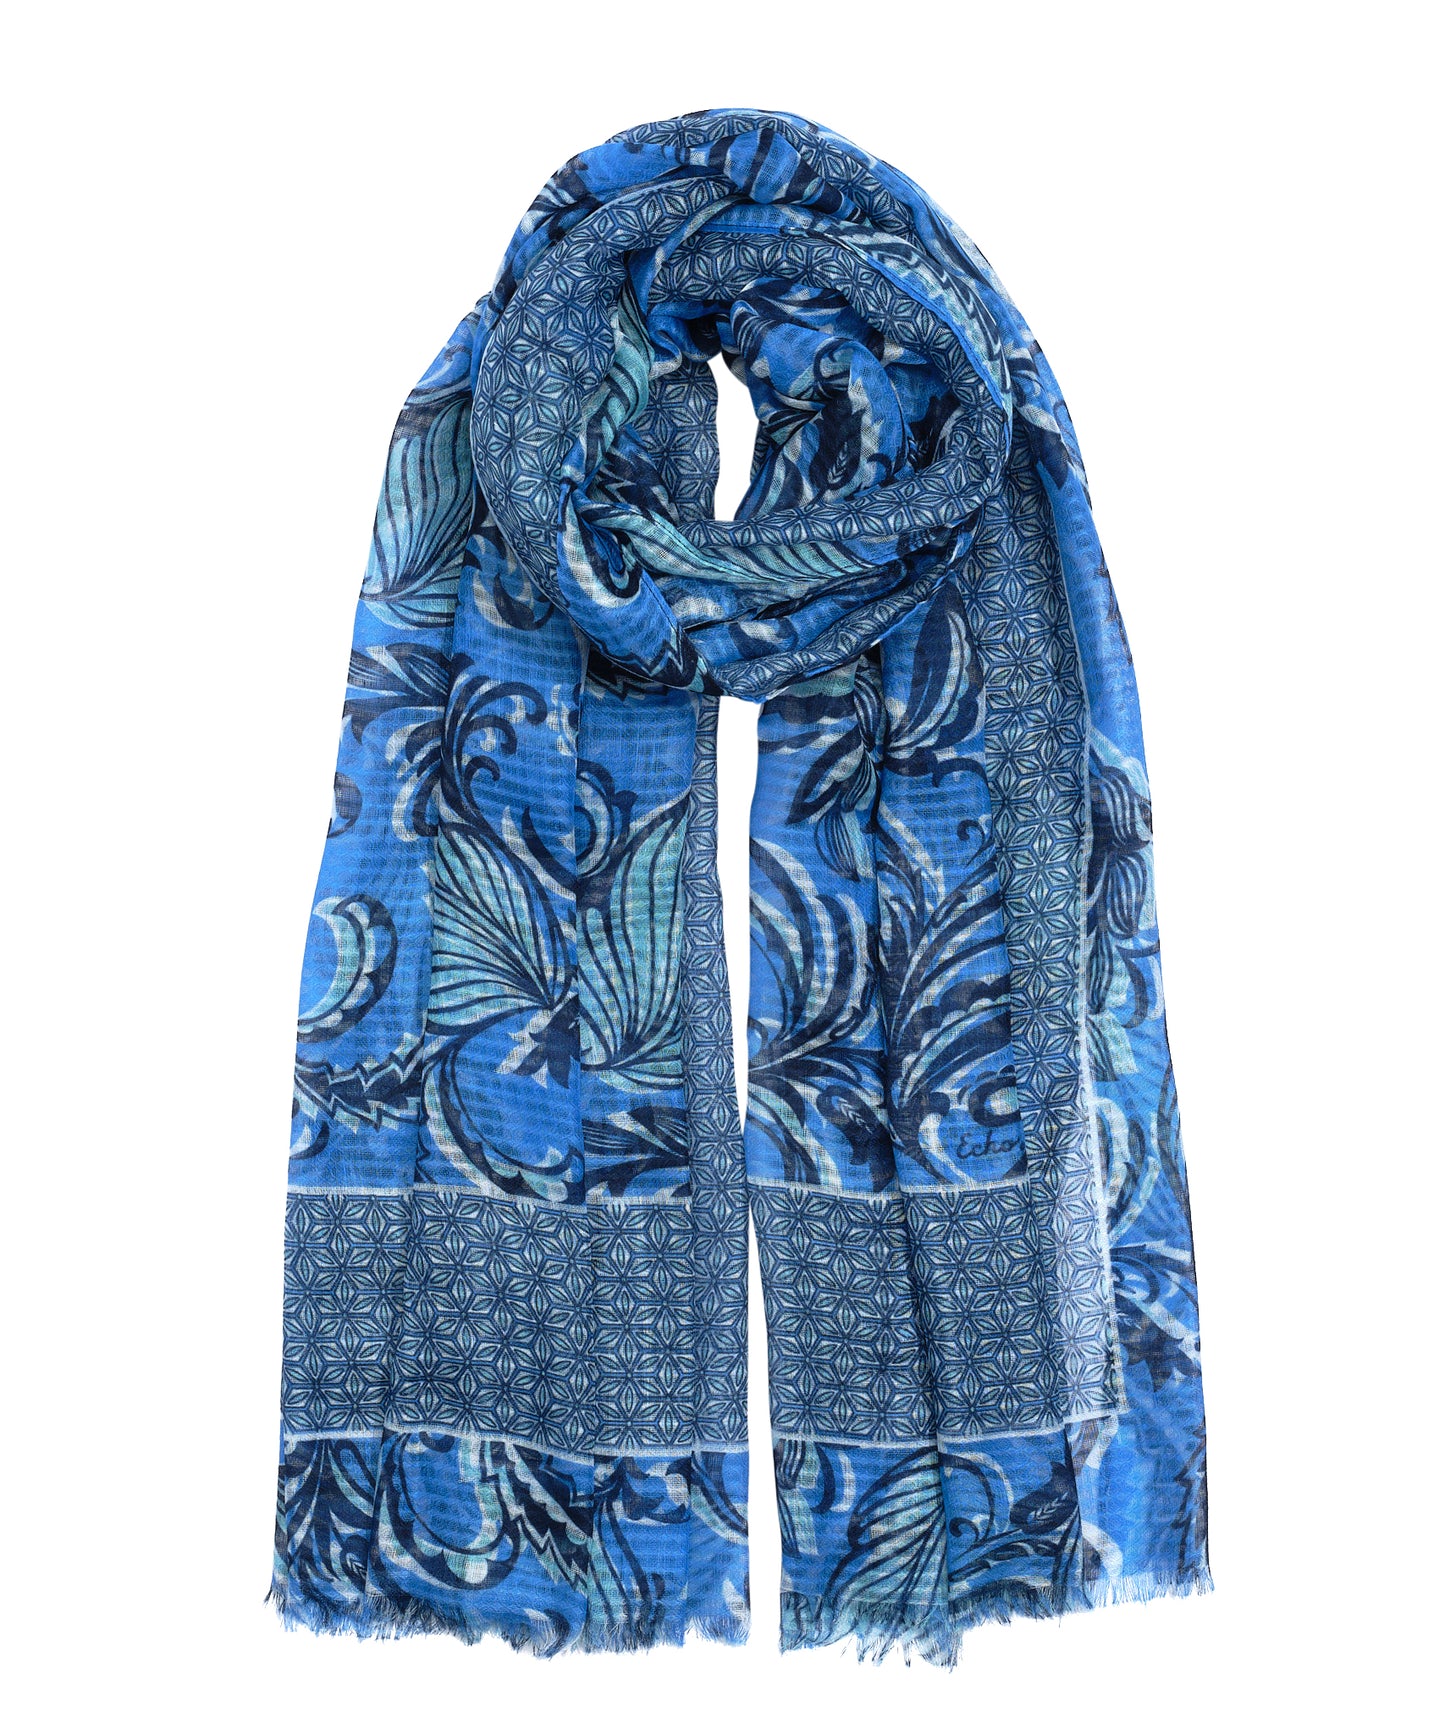 Tangled Vines Wrap in color Sea Blue